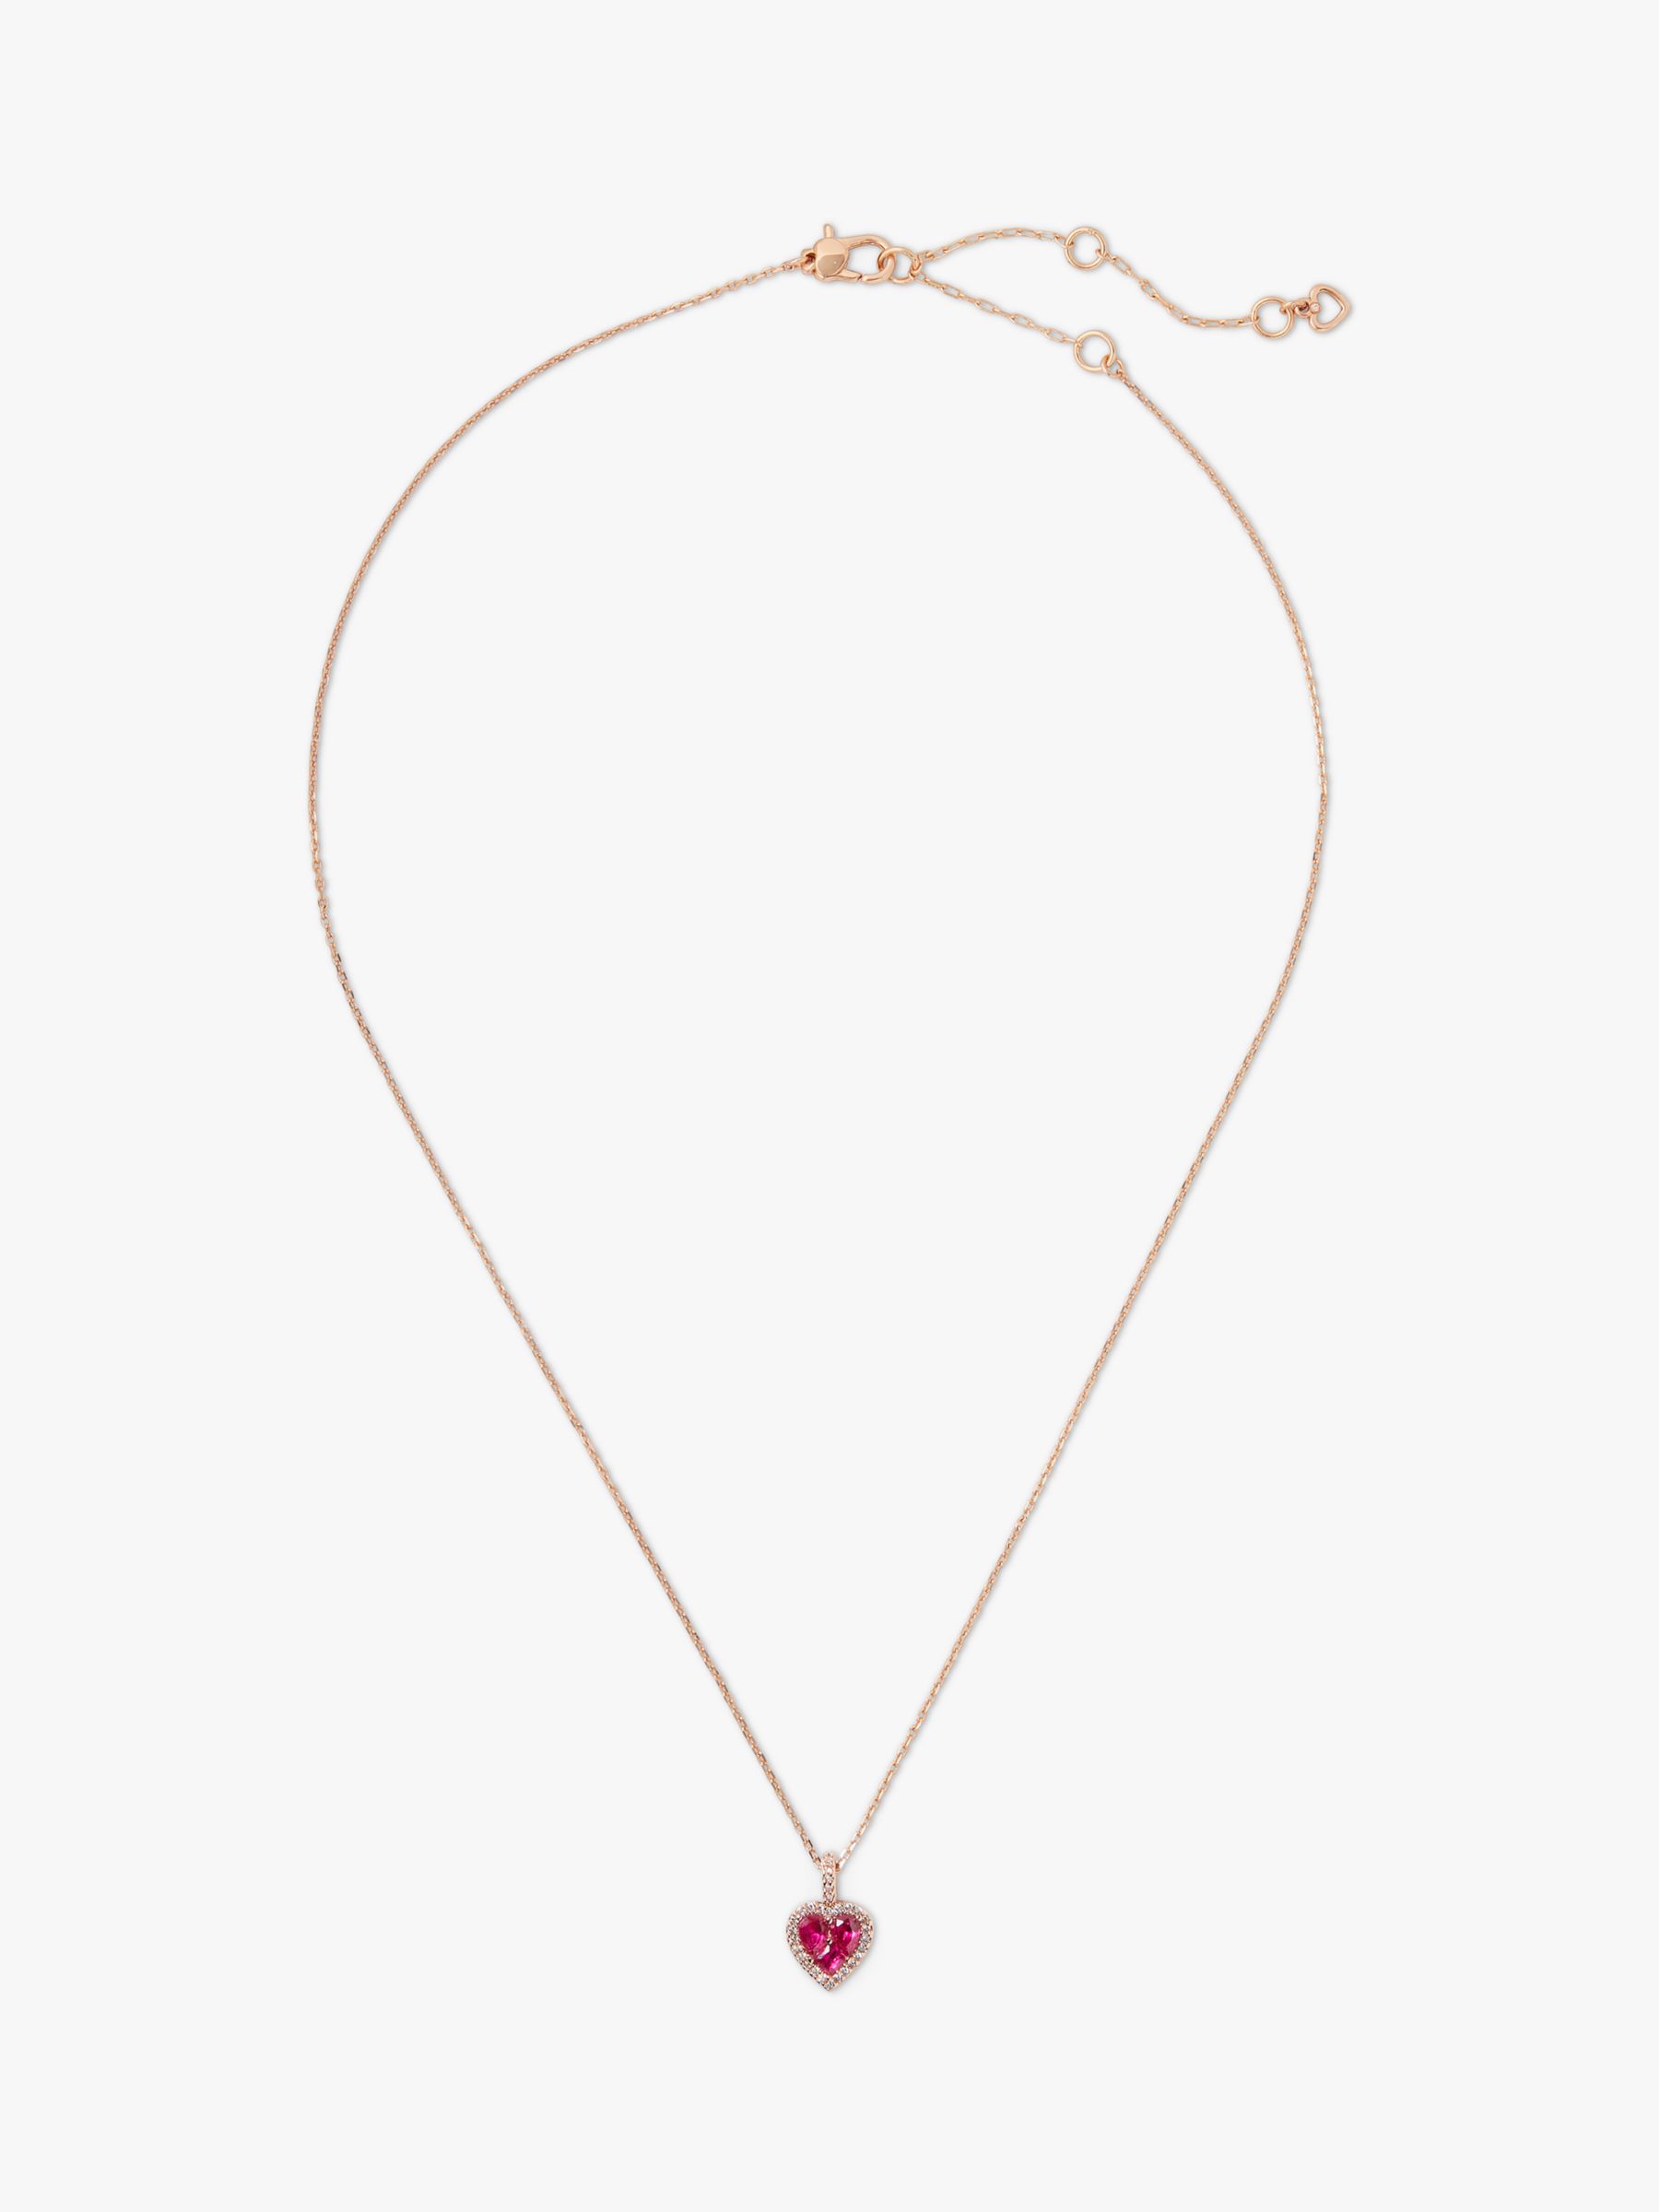 kate spade new york Cubic Zirconia Heart Pendant Necklace, Gold/Pink